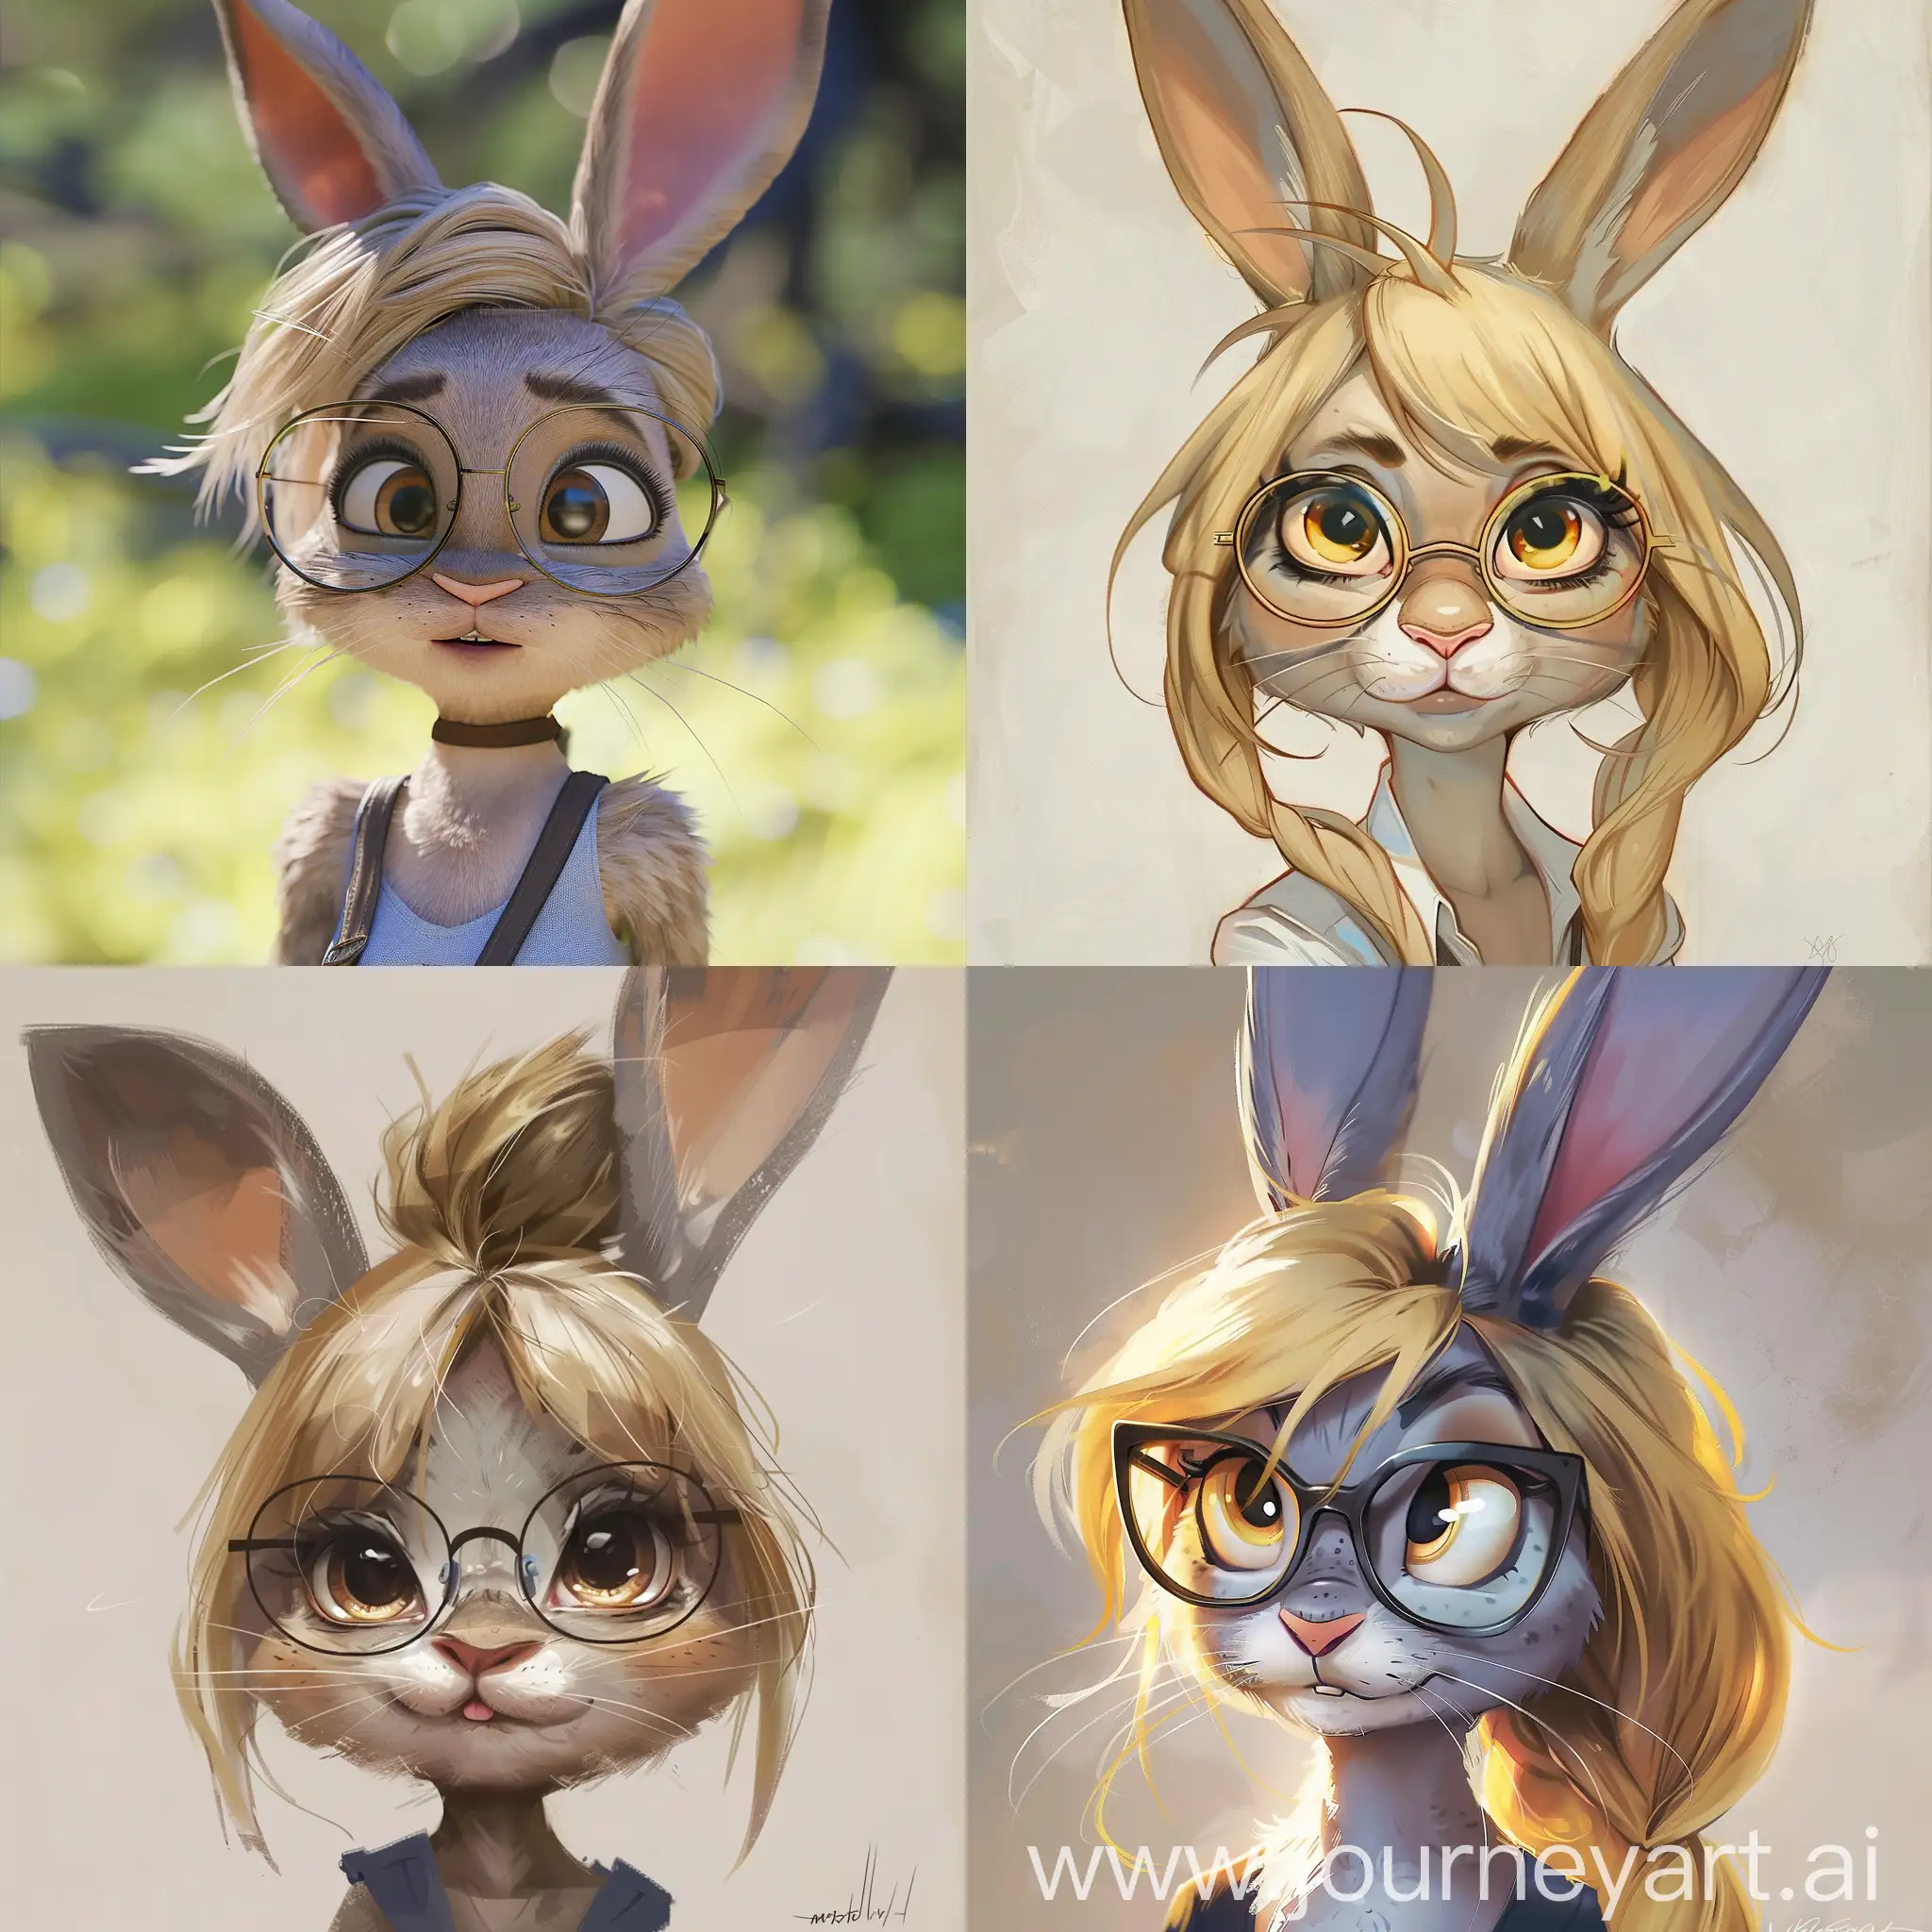 Intelligent-Bunny-with-Blonde-Hair-and-Glasses-Portrait